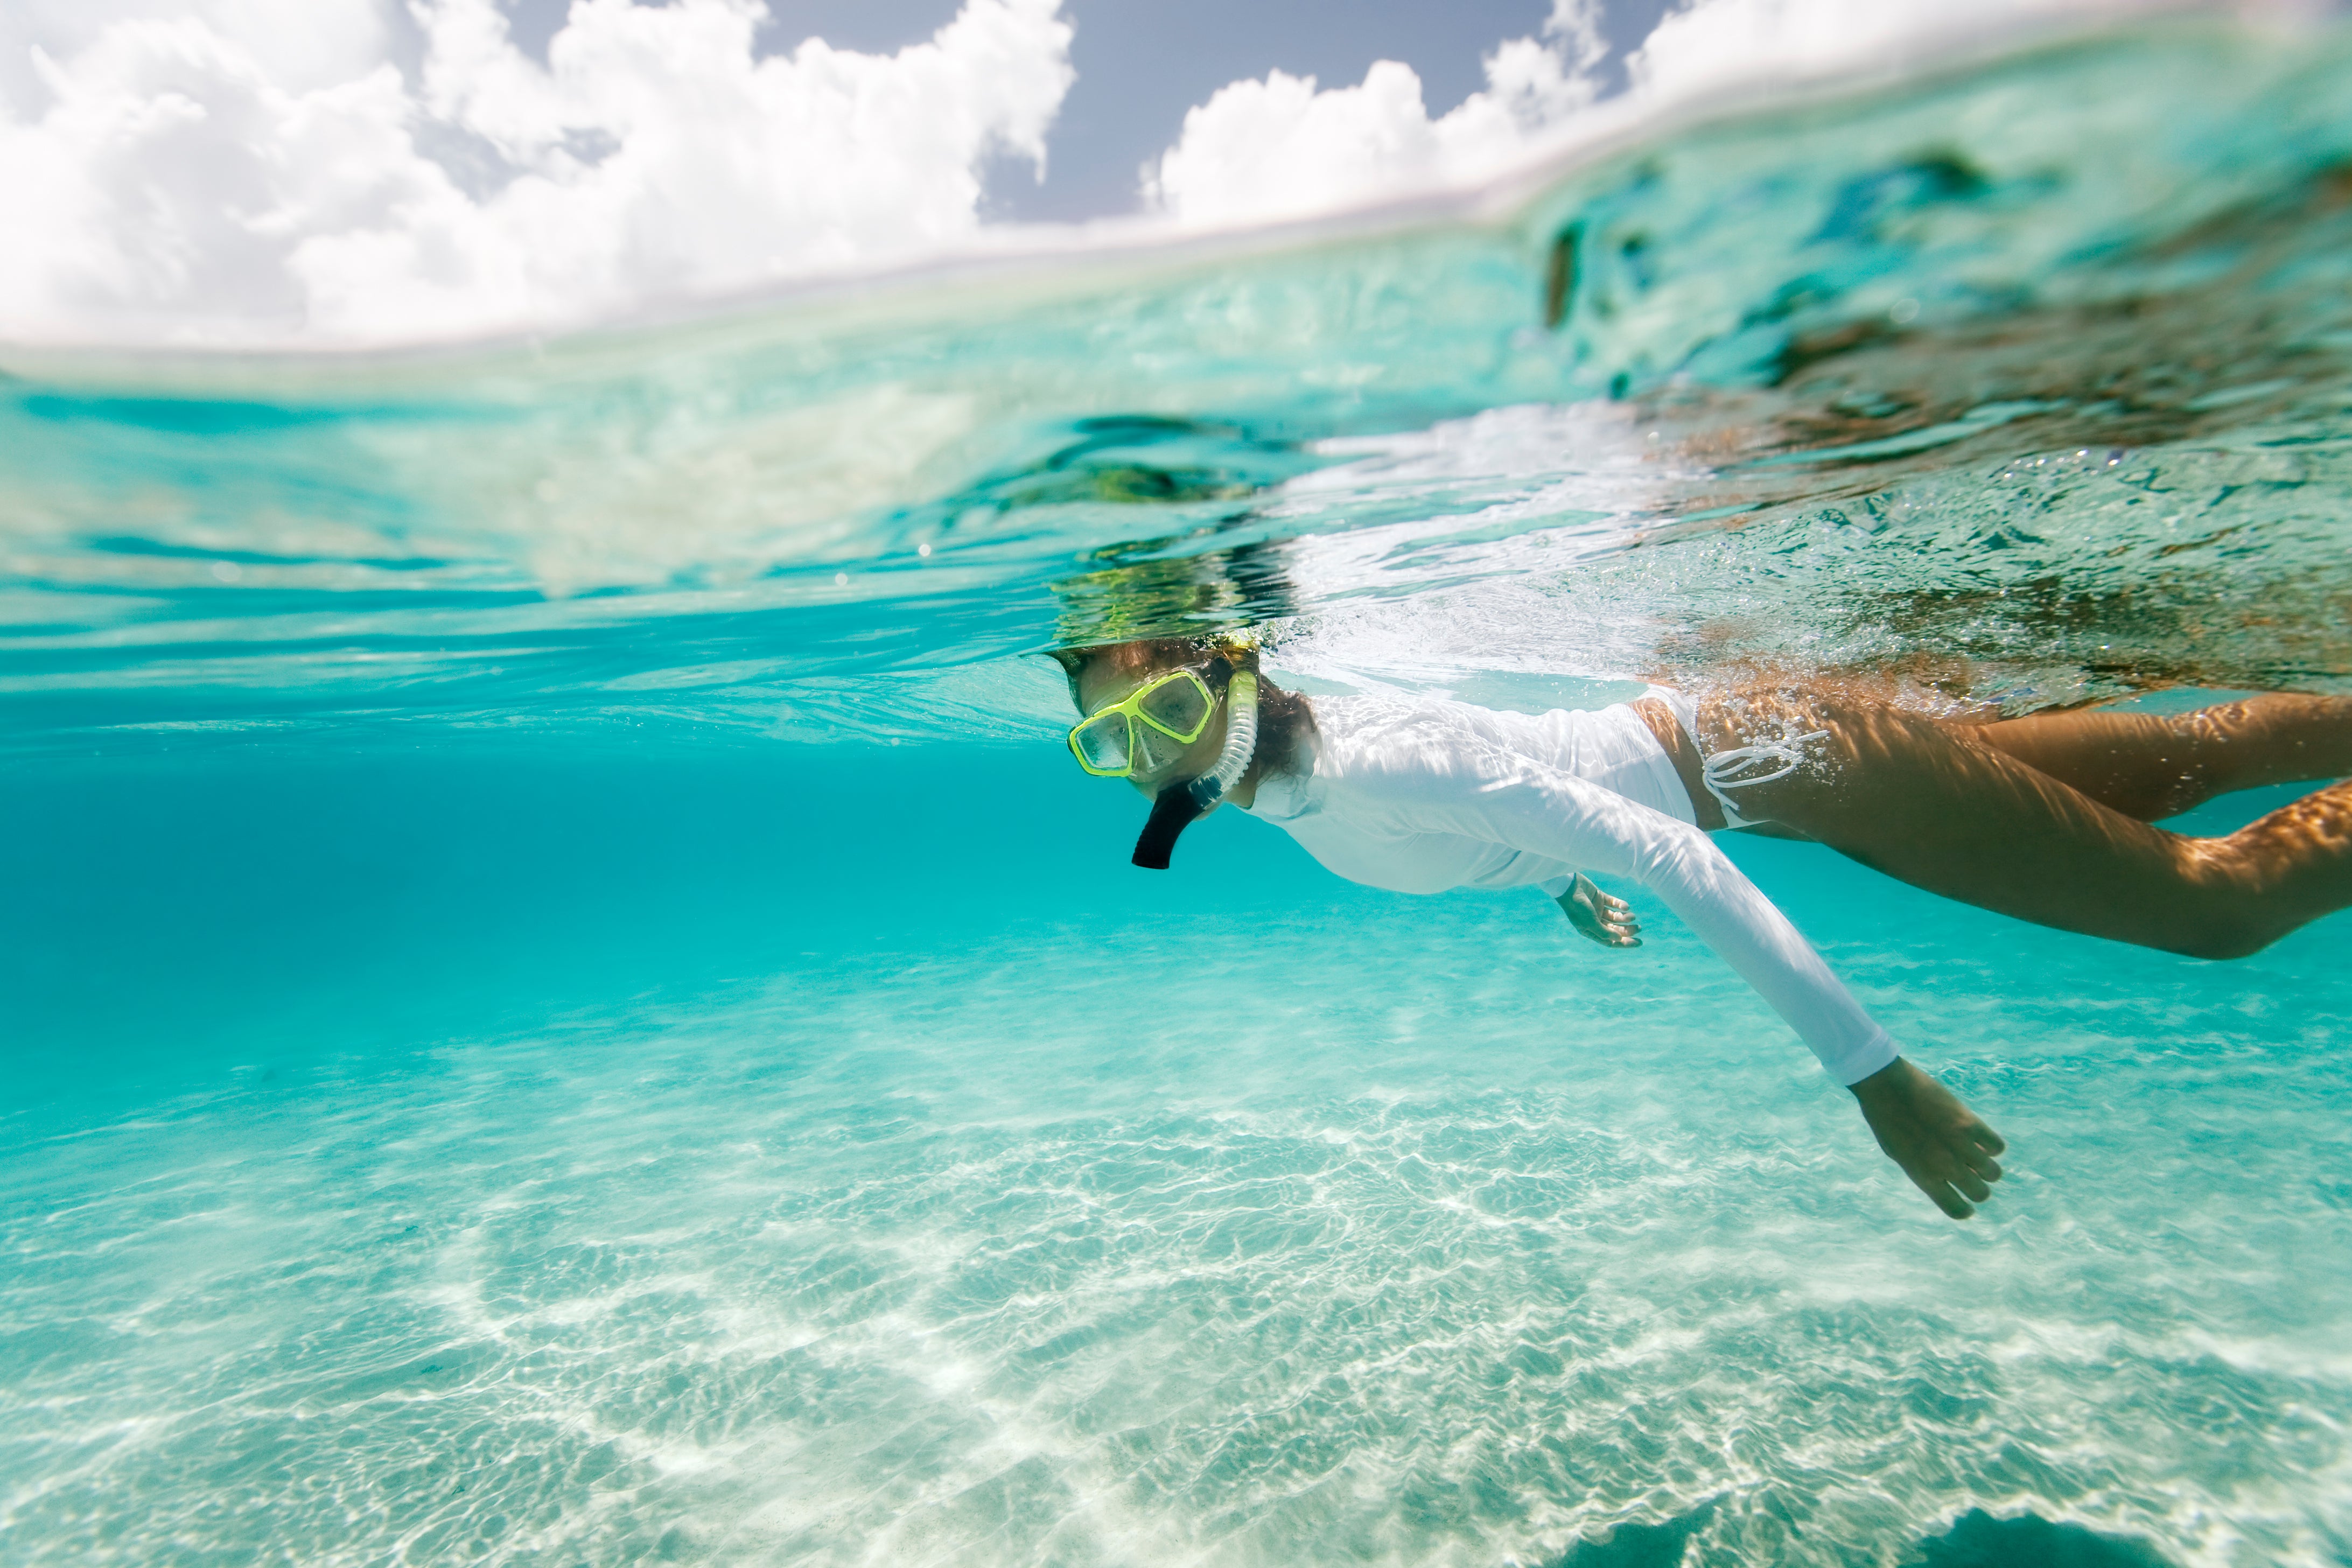 Grab some Gear and Snorkel in these Emerald waters